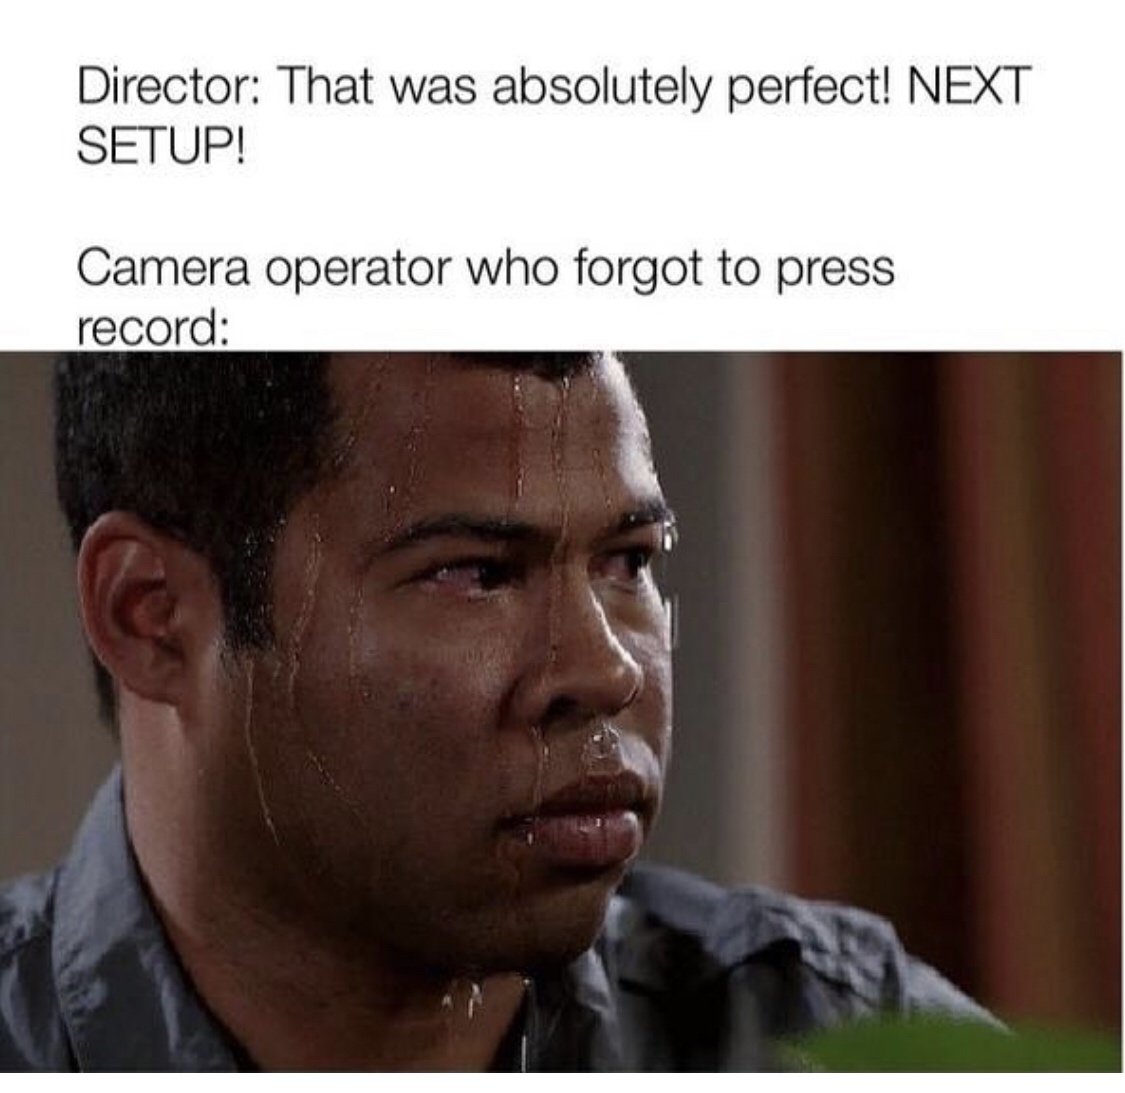 white guys drywall meme - Director That was absolutely perfect! Next Setup! Camera operator who forgot to press record